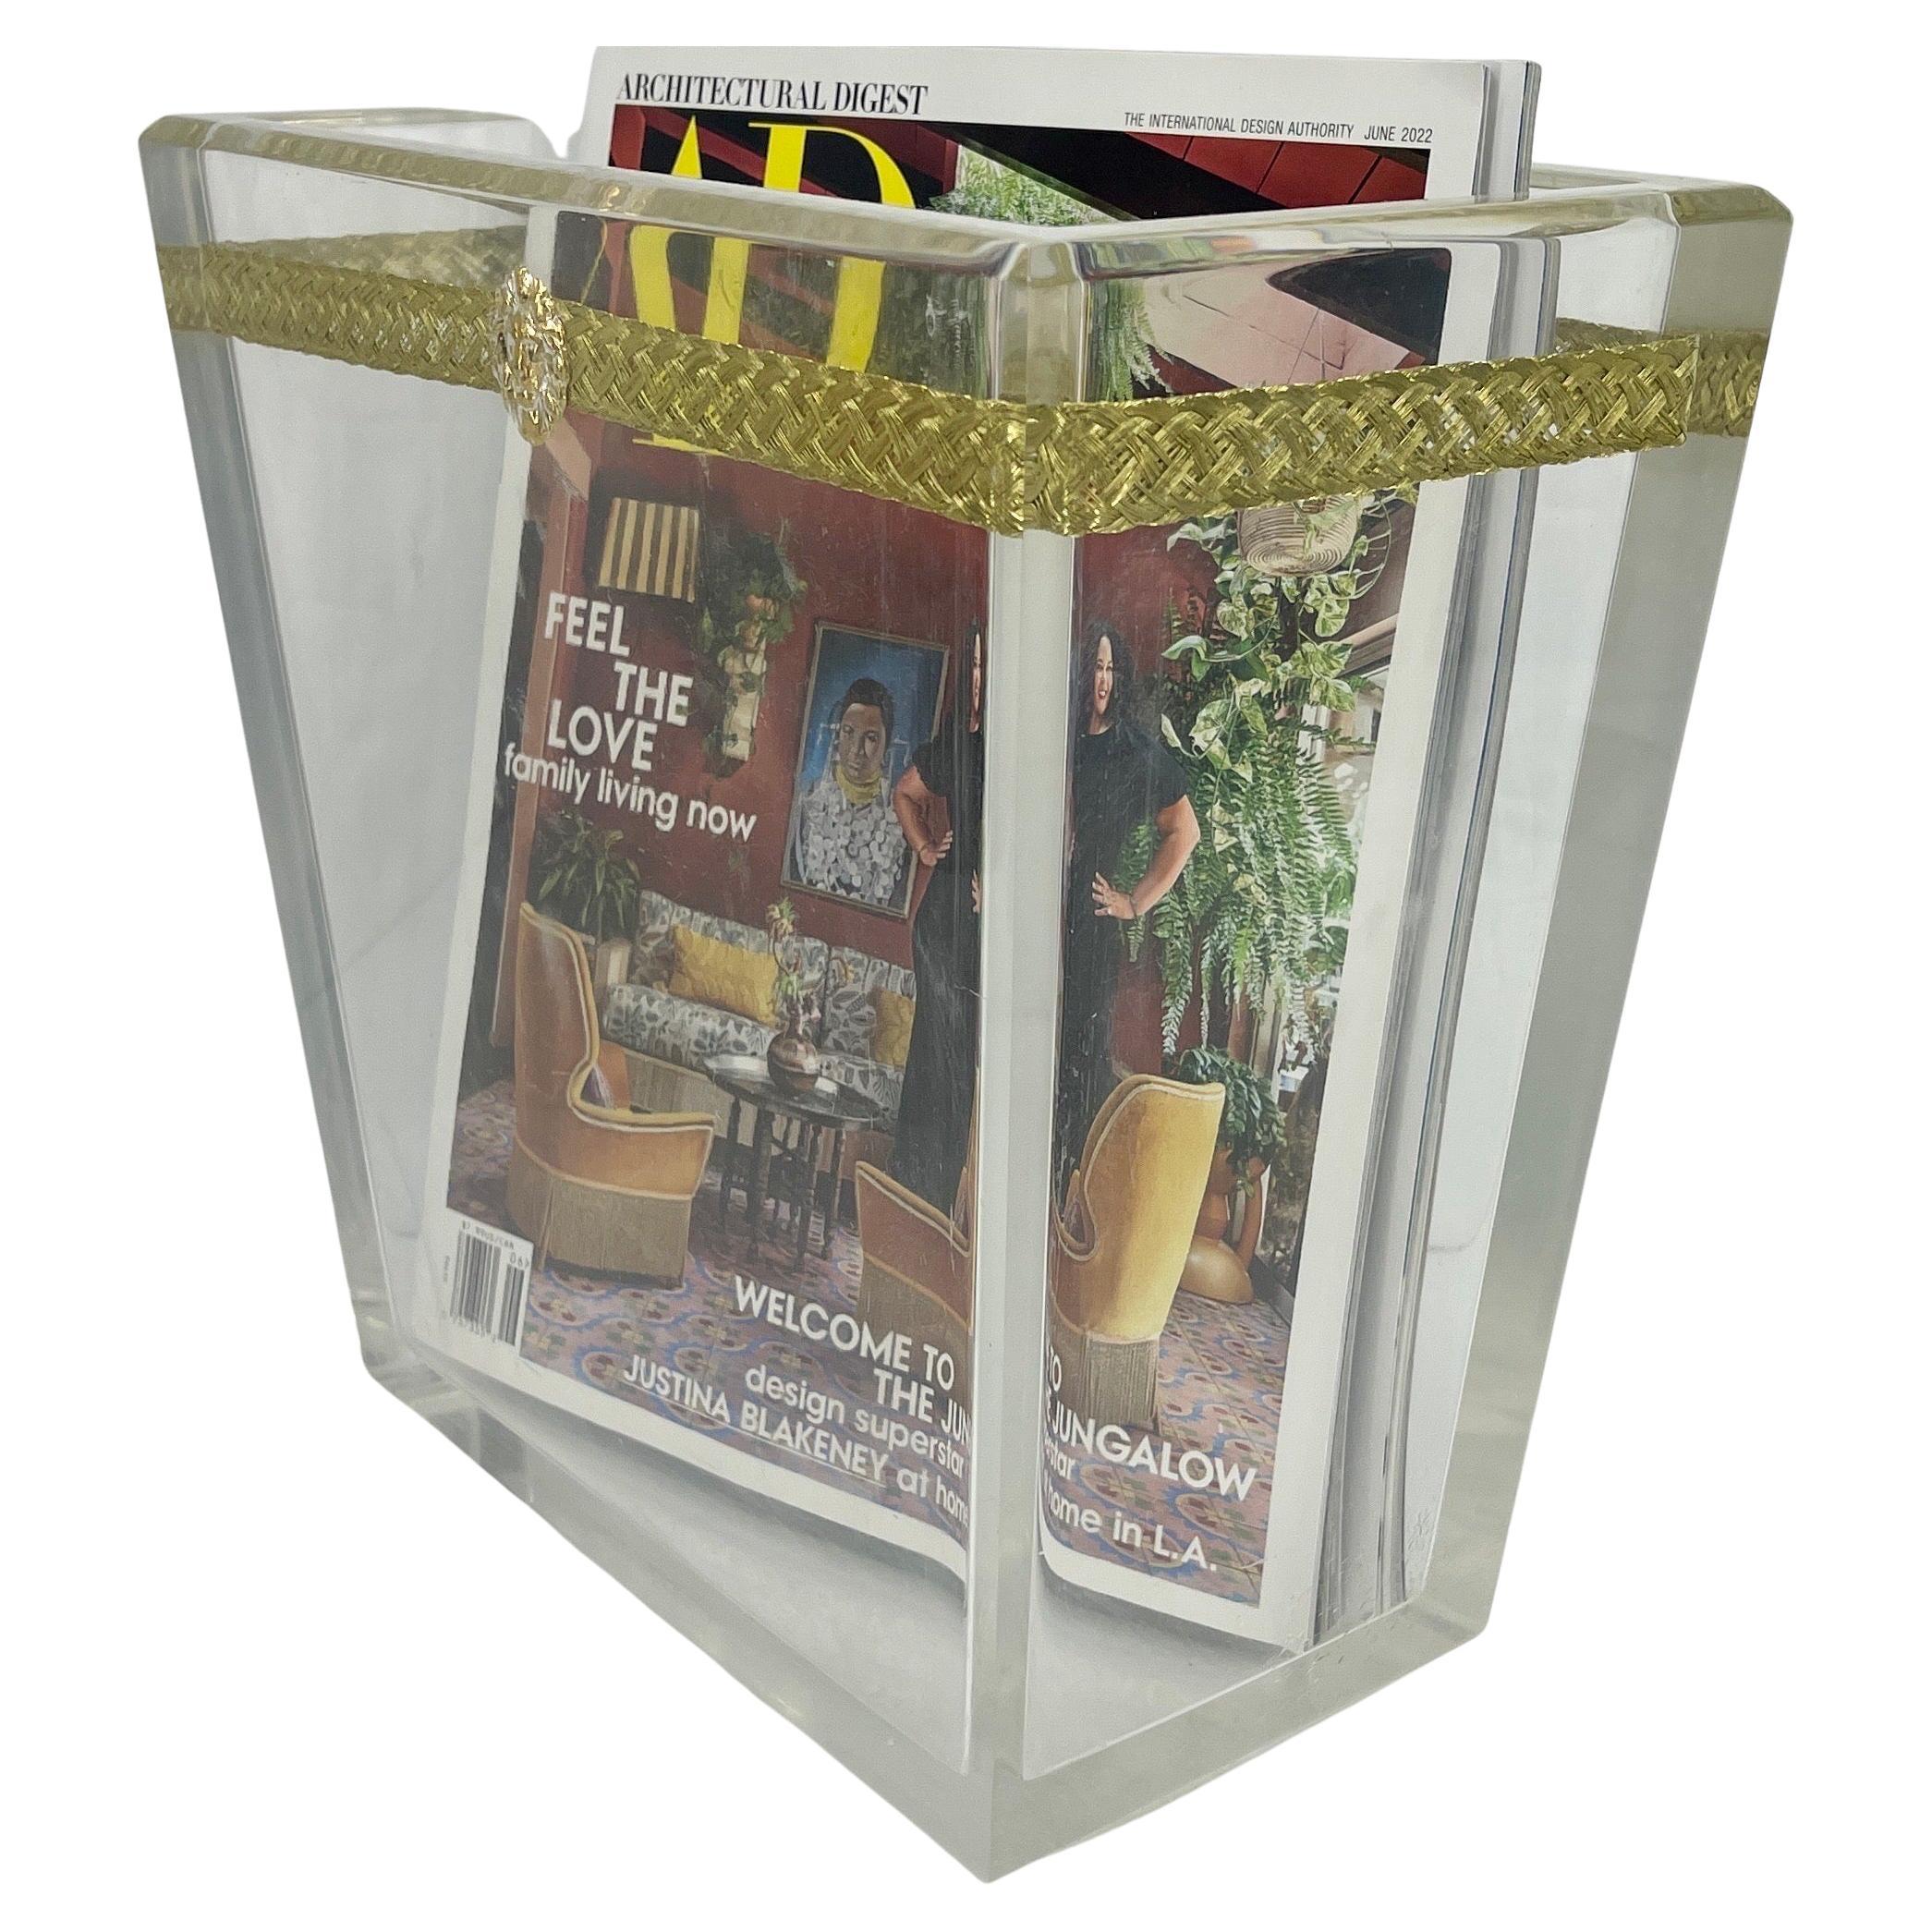 Thick Lucite Italian Magazine Rack with Lion Head and Gilt Metal Thread, Italy